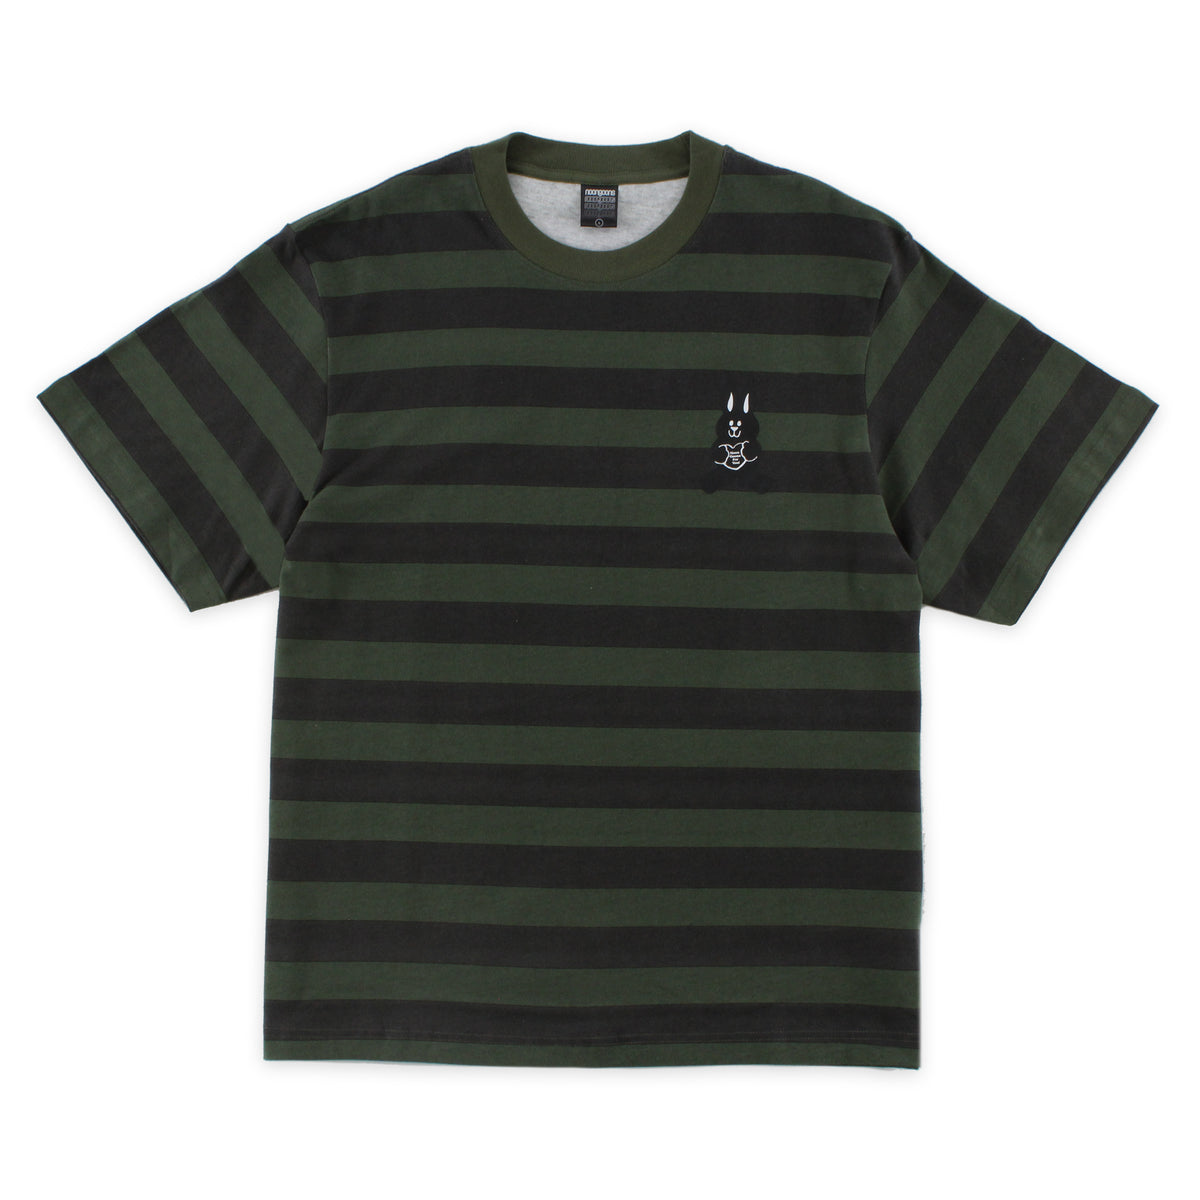 Stoned Stripe T - Green/Forest